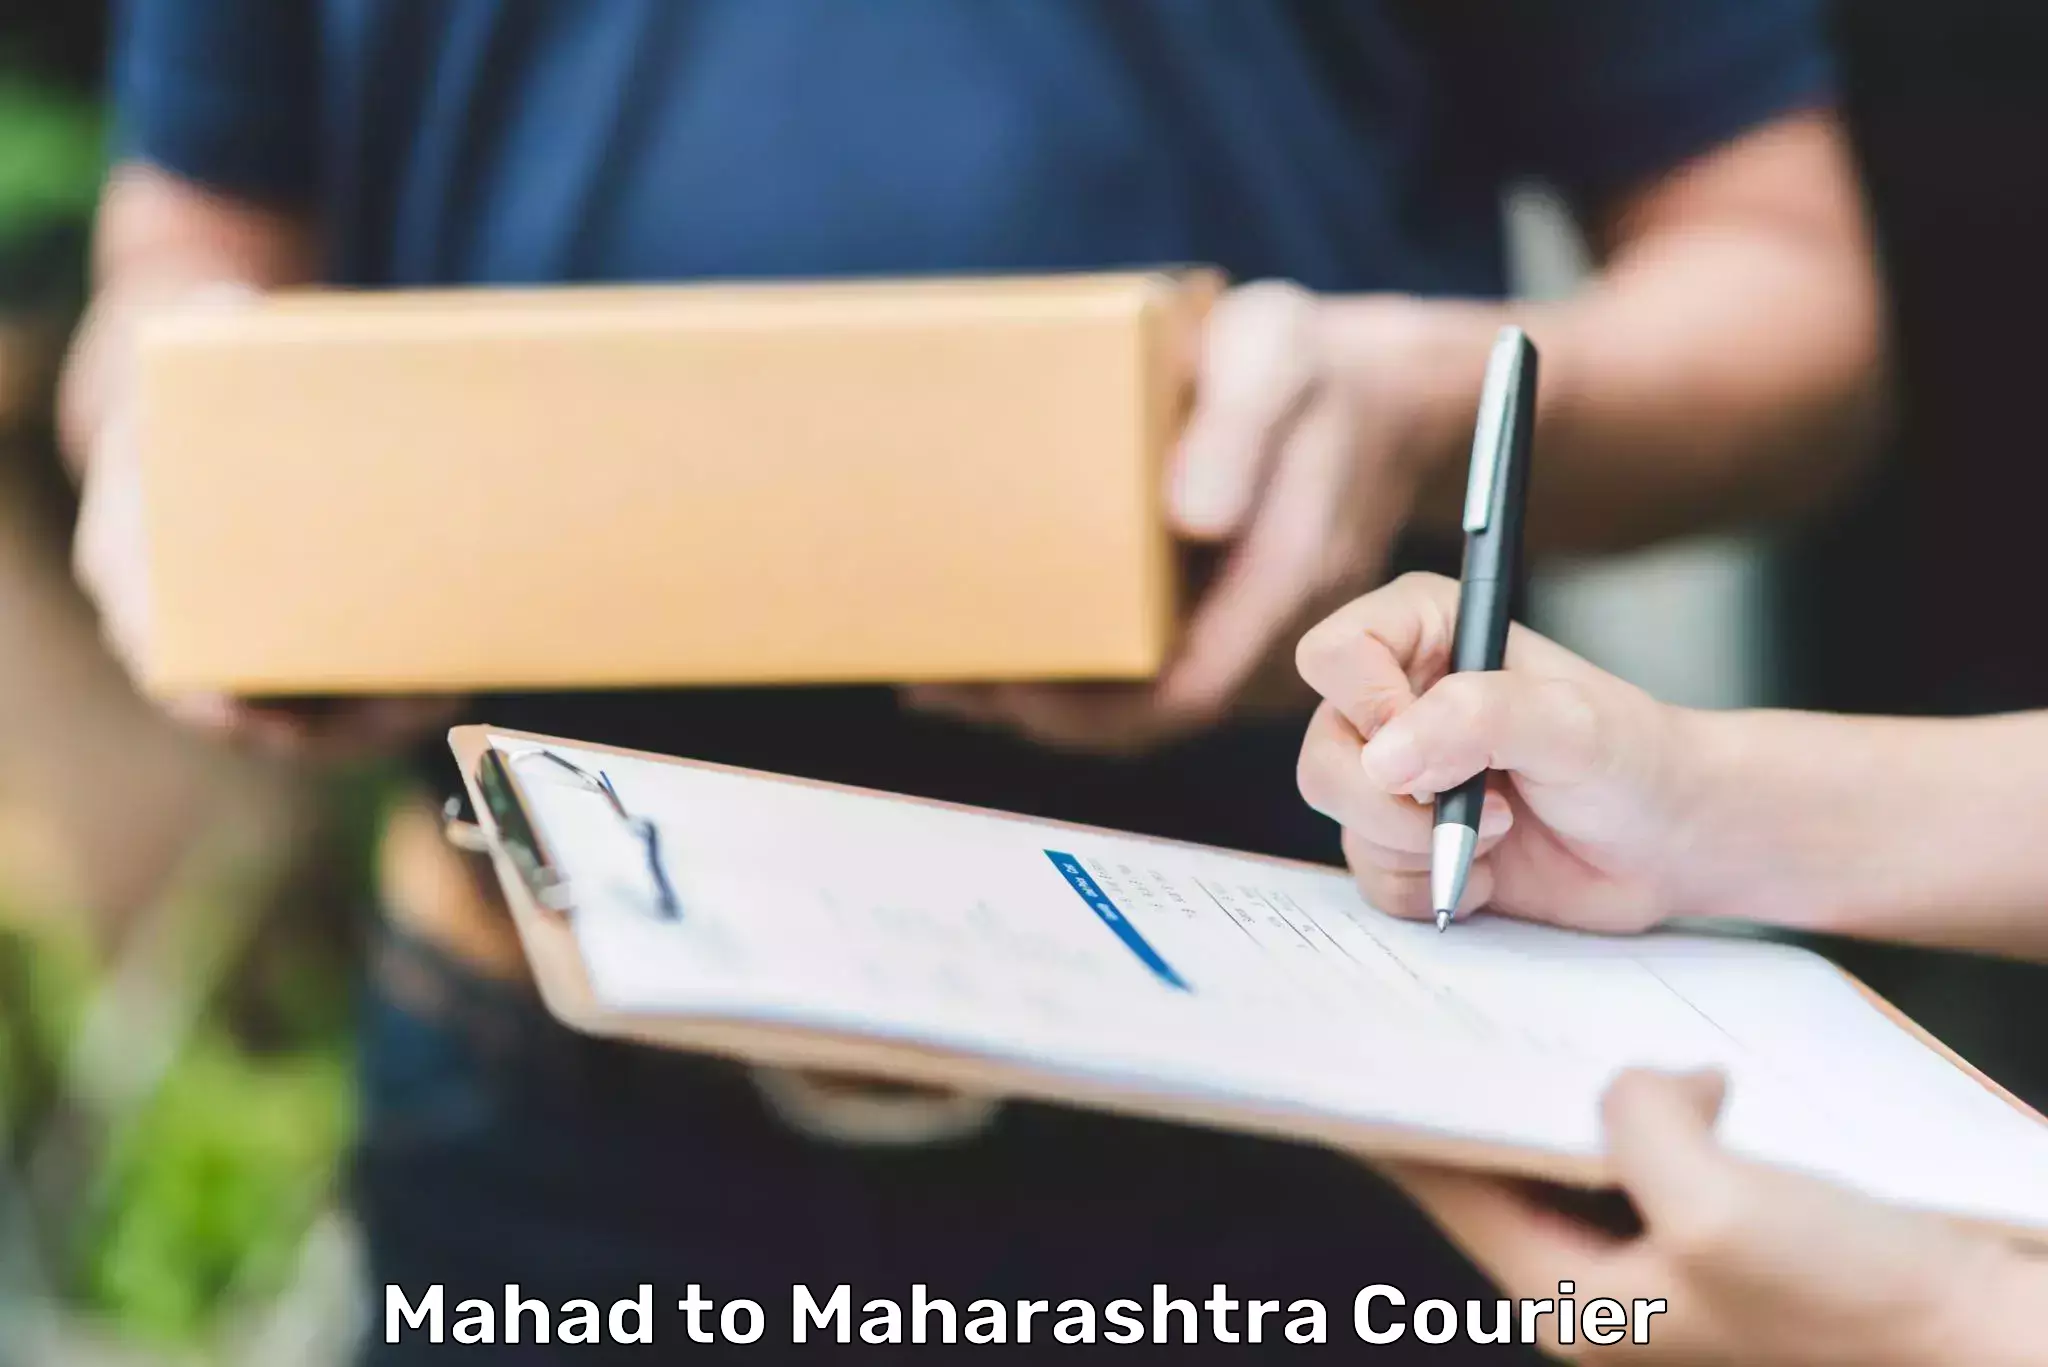 End-to-end delivery Mahad to Maharashtra